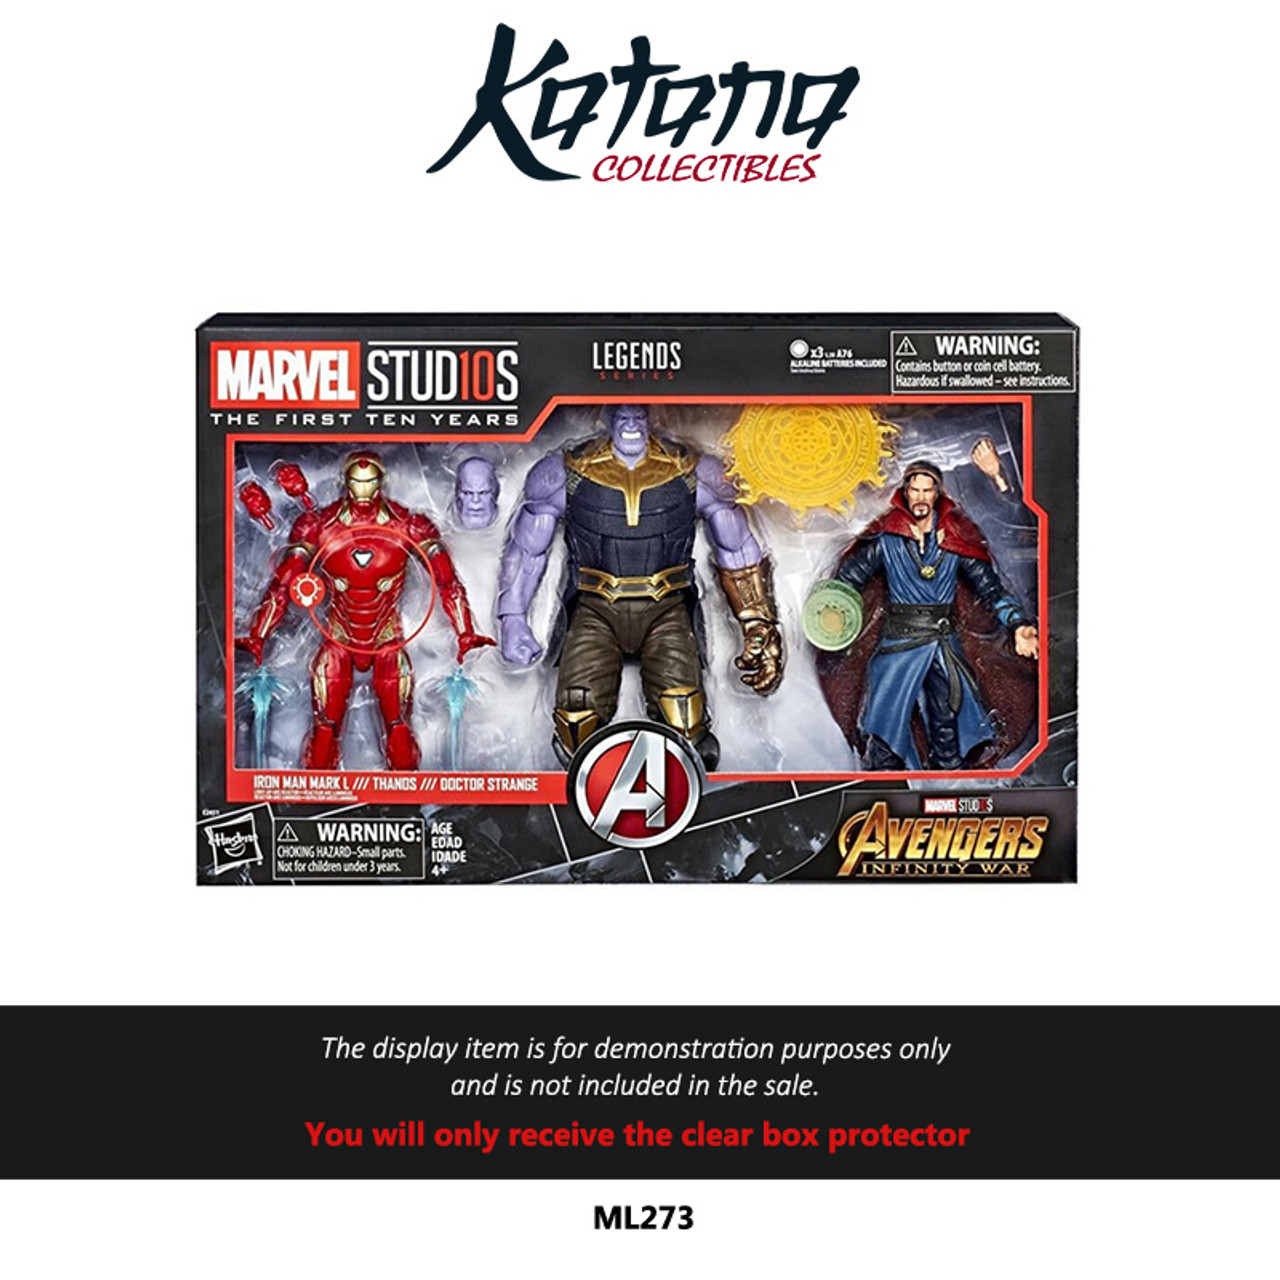 Katana Collectibles Protector For Marvel Legends Iron Man, Thanos & Doctor Strange 3-Pack Figures